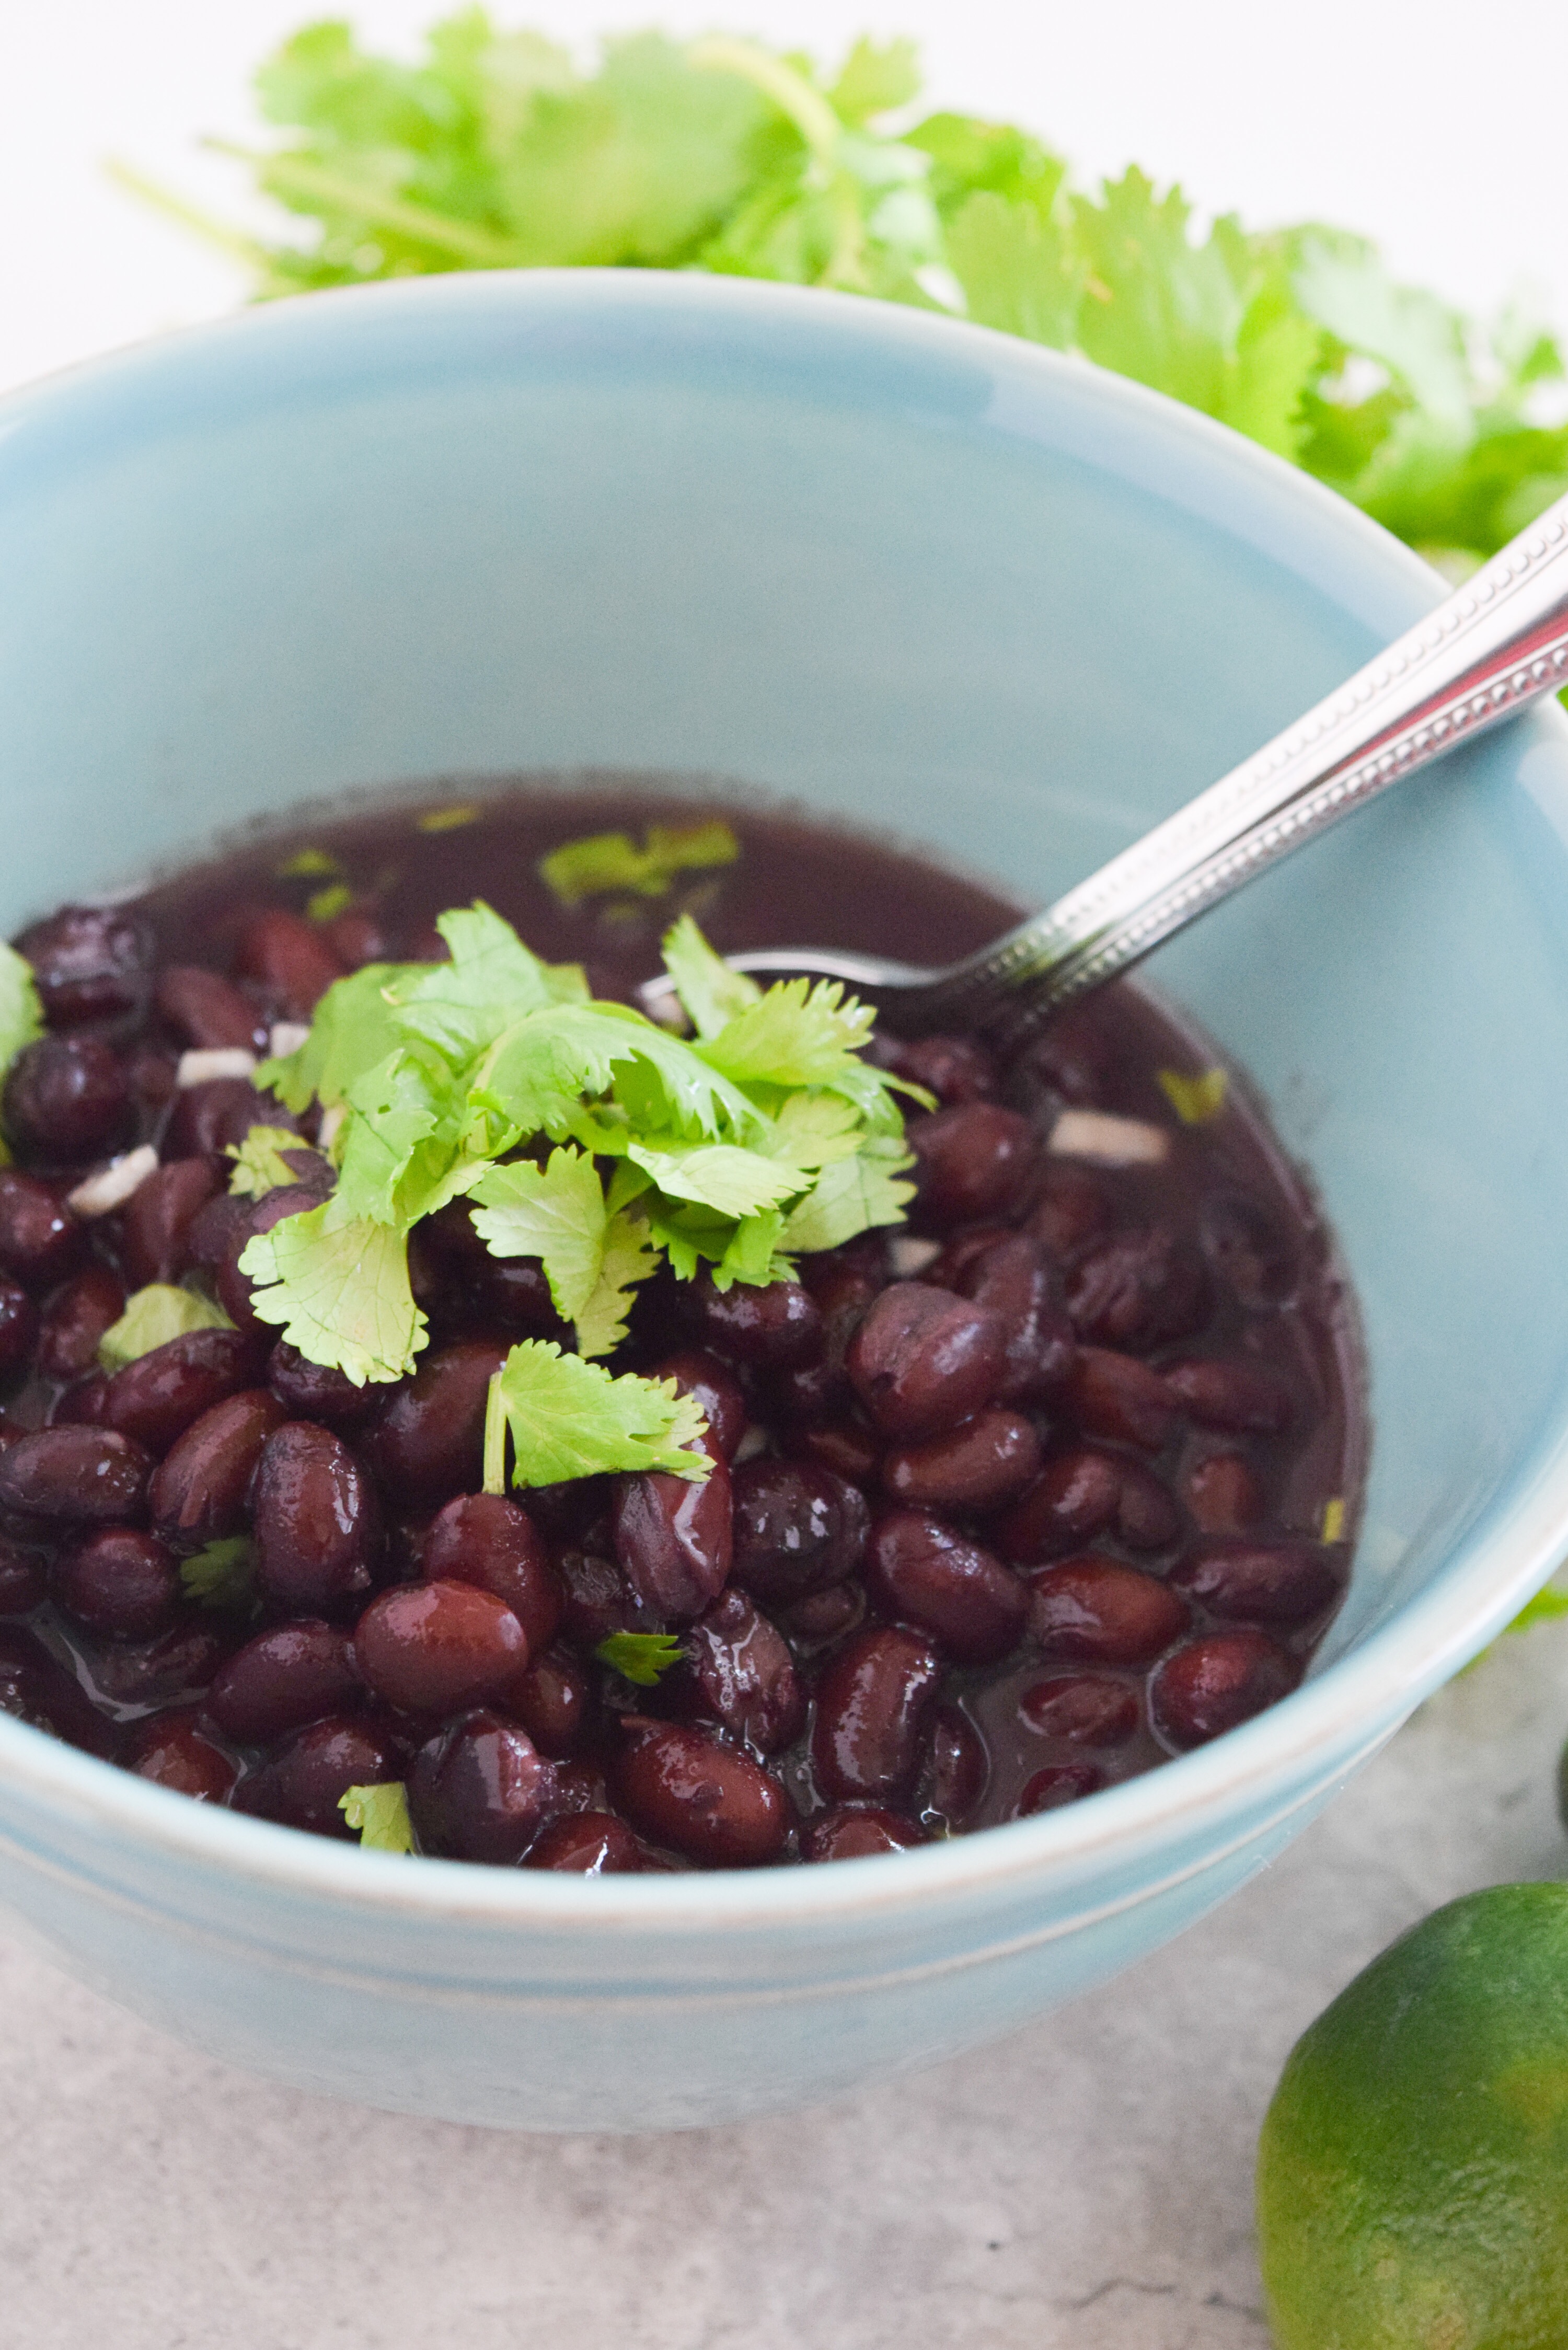 Sometimes you just need an easy way to doctor up canned black beans for taco night- this is your recipe! Cilantro Lime Black Beans are so easy to throw together in a pinch. 